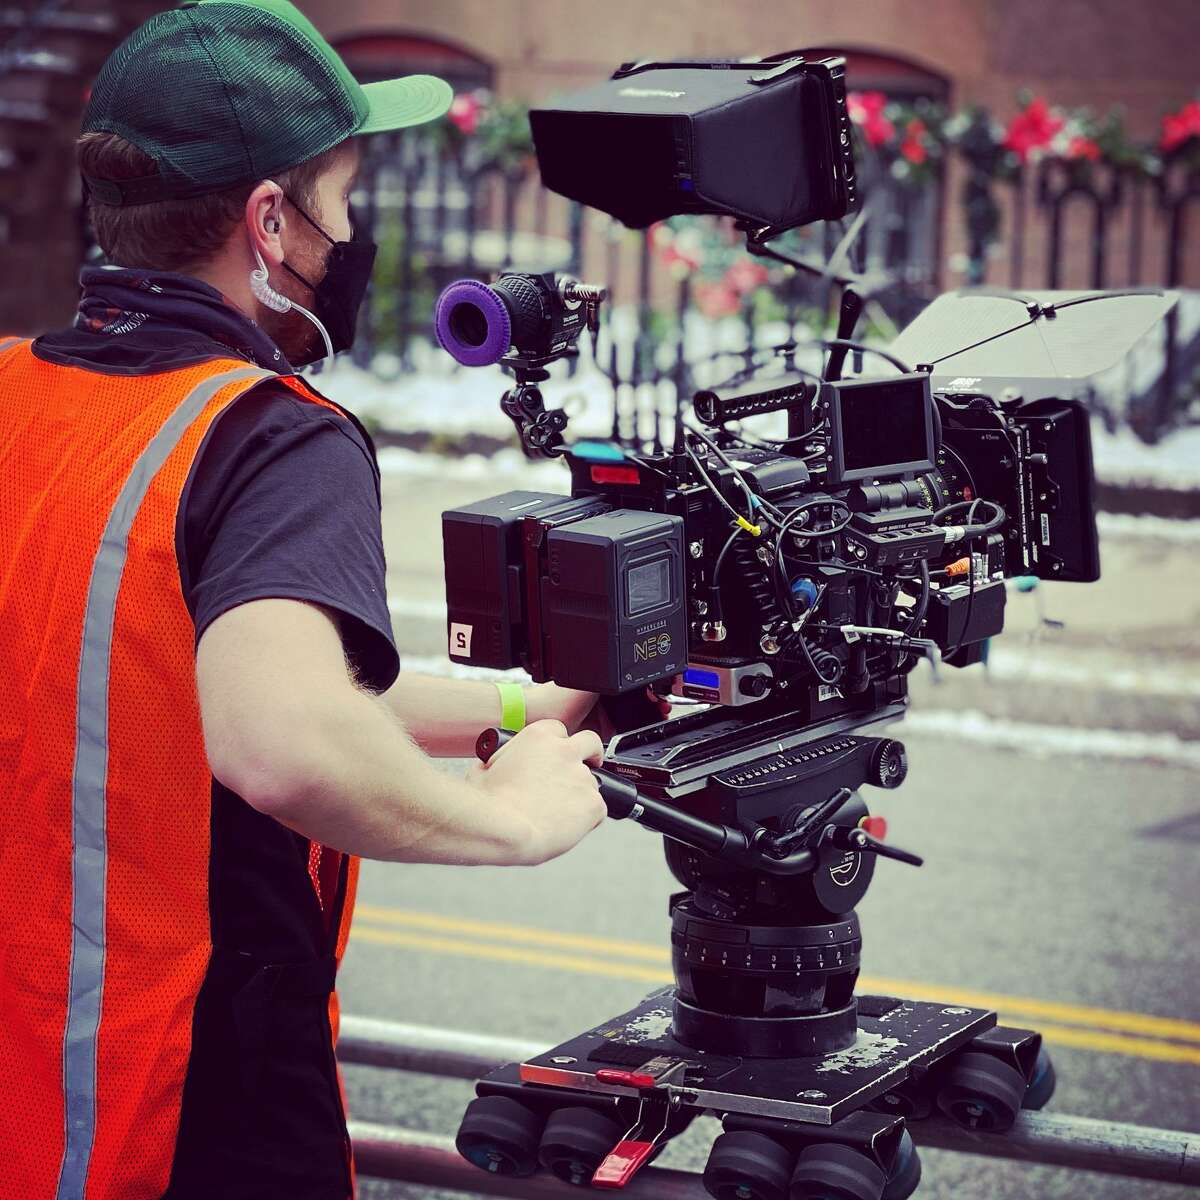 Behind-the-scenes footage of one of several Hallmark films shot in Connecticut. “You, Me & The Christmas Trees” starring Danica McKeller, Benjamin Ayres and Jason Hervey was shot in Avon, where the movie is set. The movie will air on the Hallmark Channel at 8 p.m. Nov. 18, midnight Nov. 25 and 4 p.m. Nov. 29.